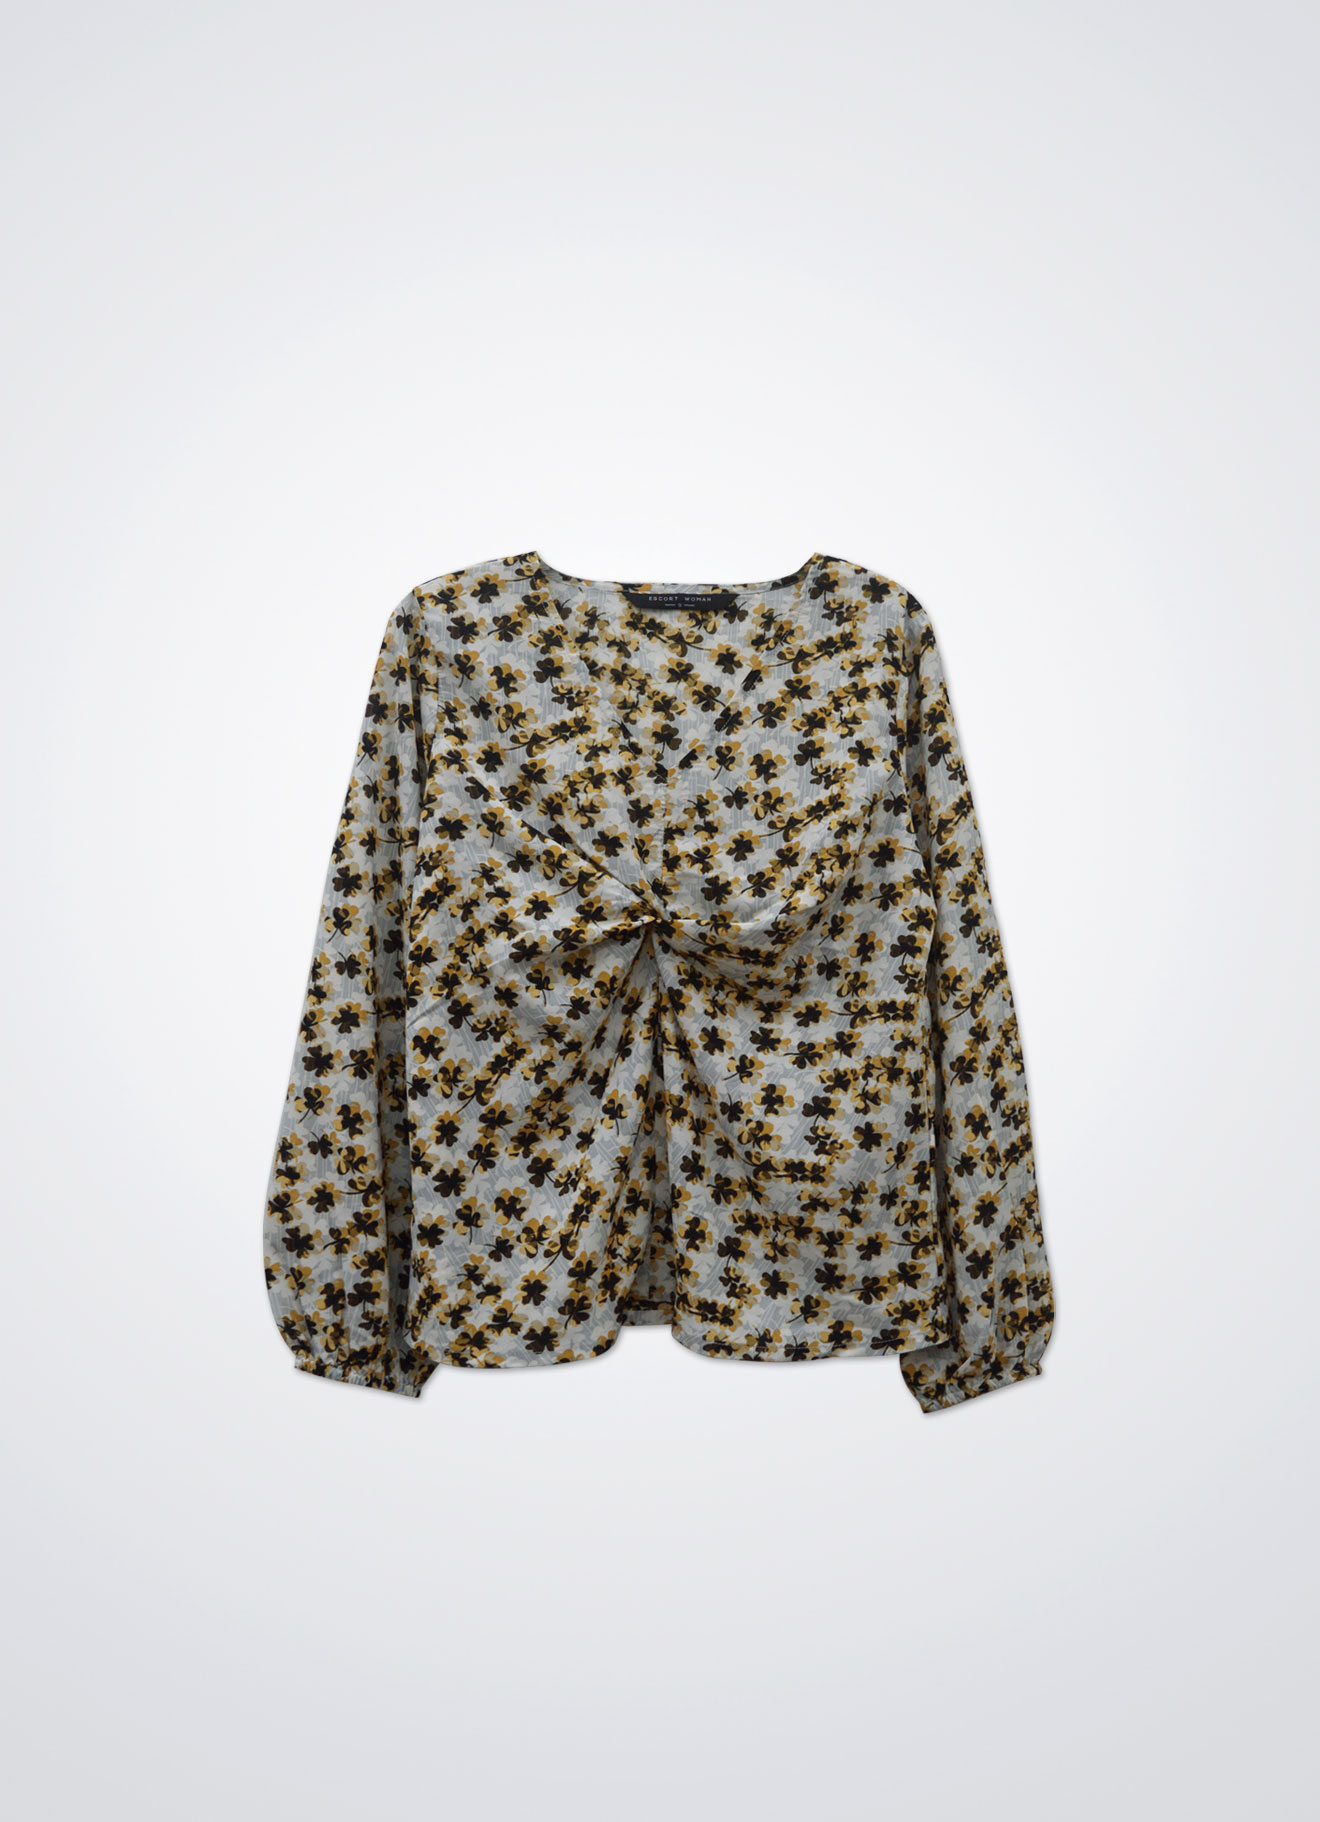 Sunflower by Printed Blouse